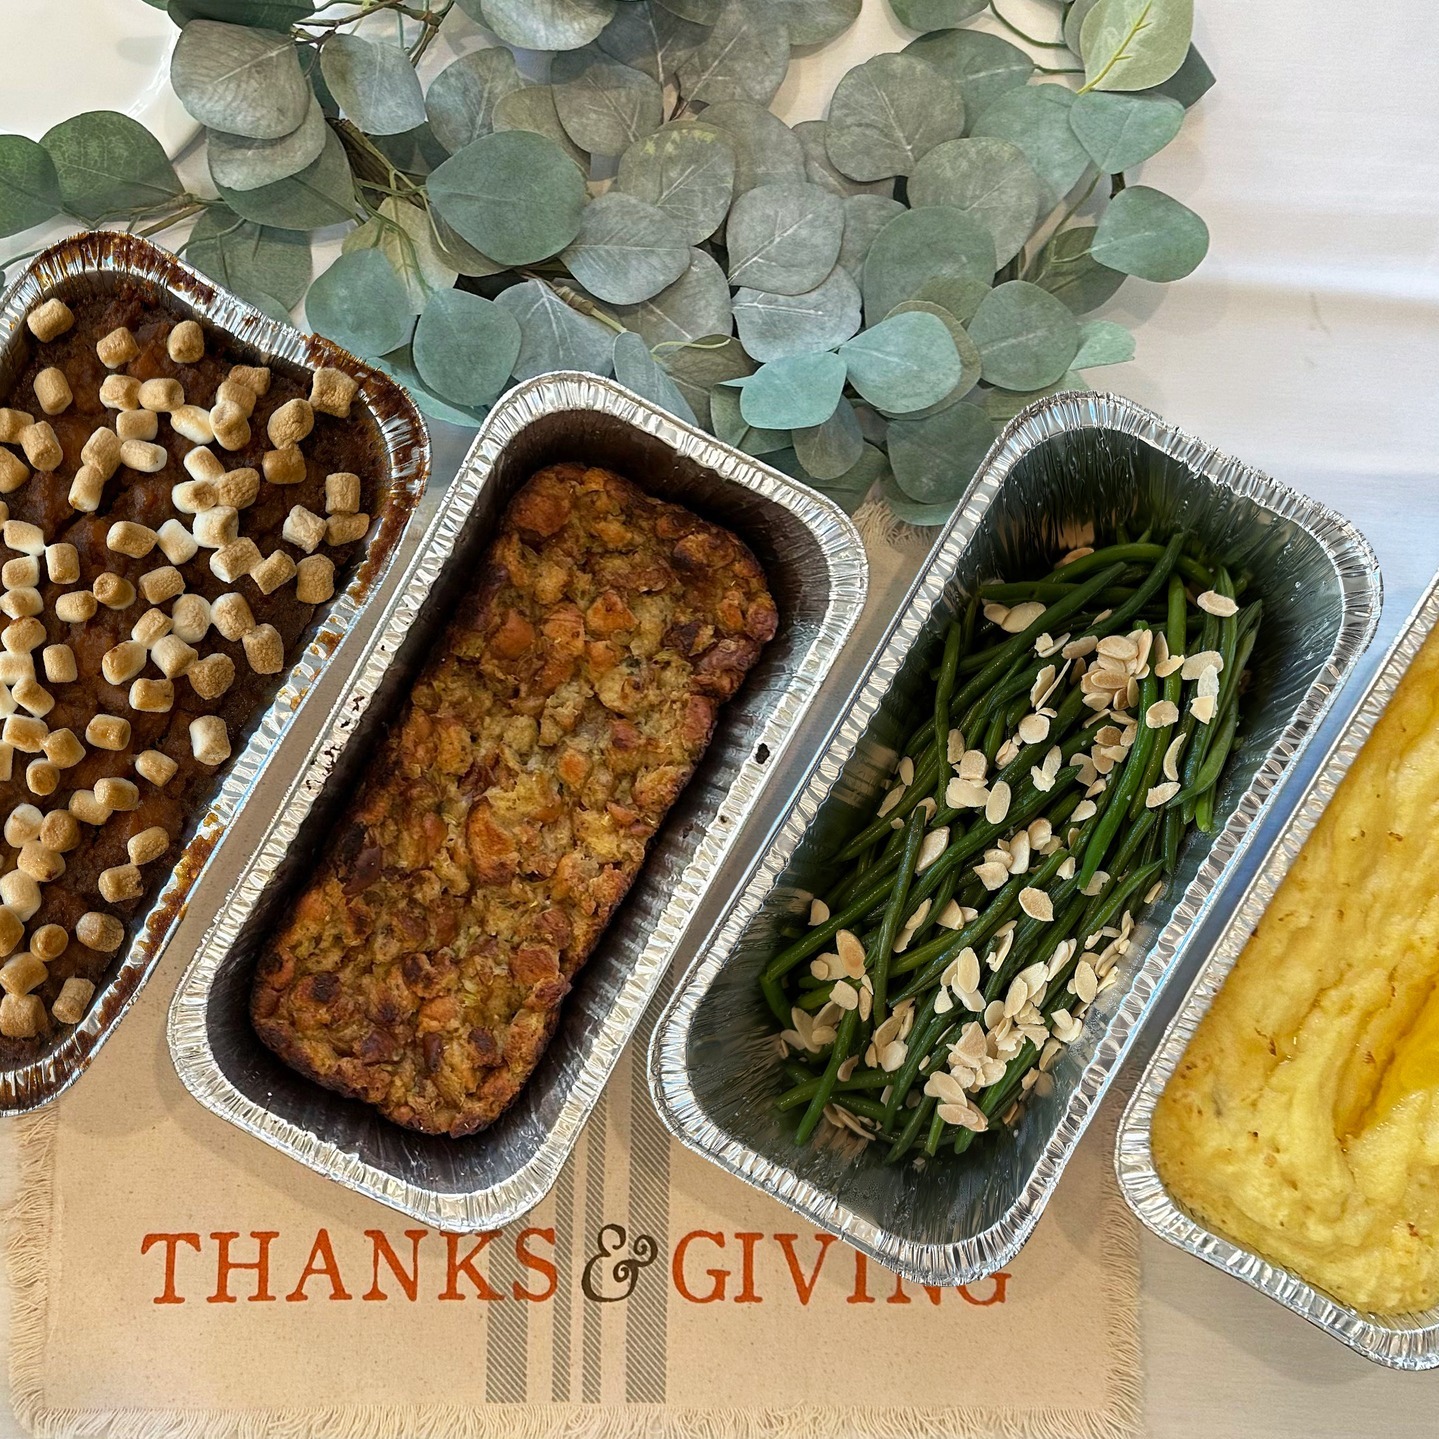 Give Thanks with The Brookwood Café's Complete Thanksgiving Feast